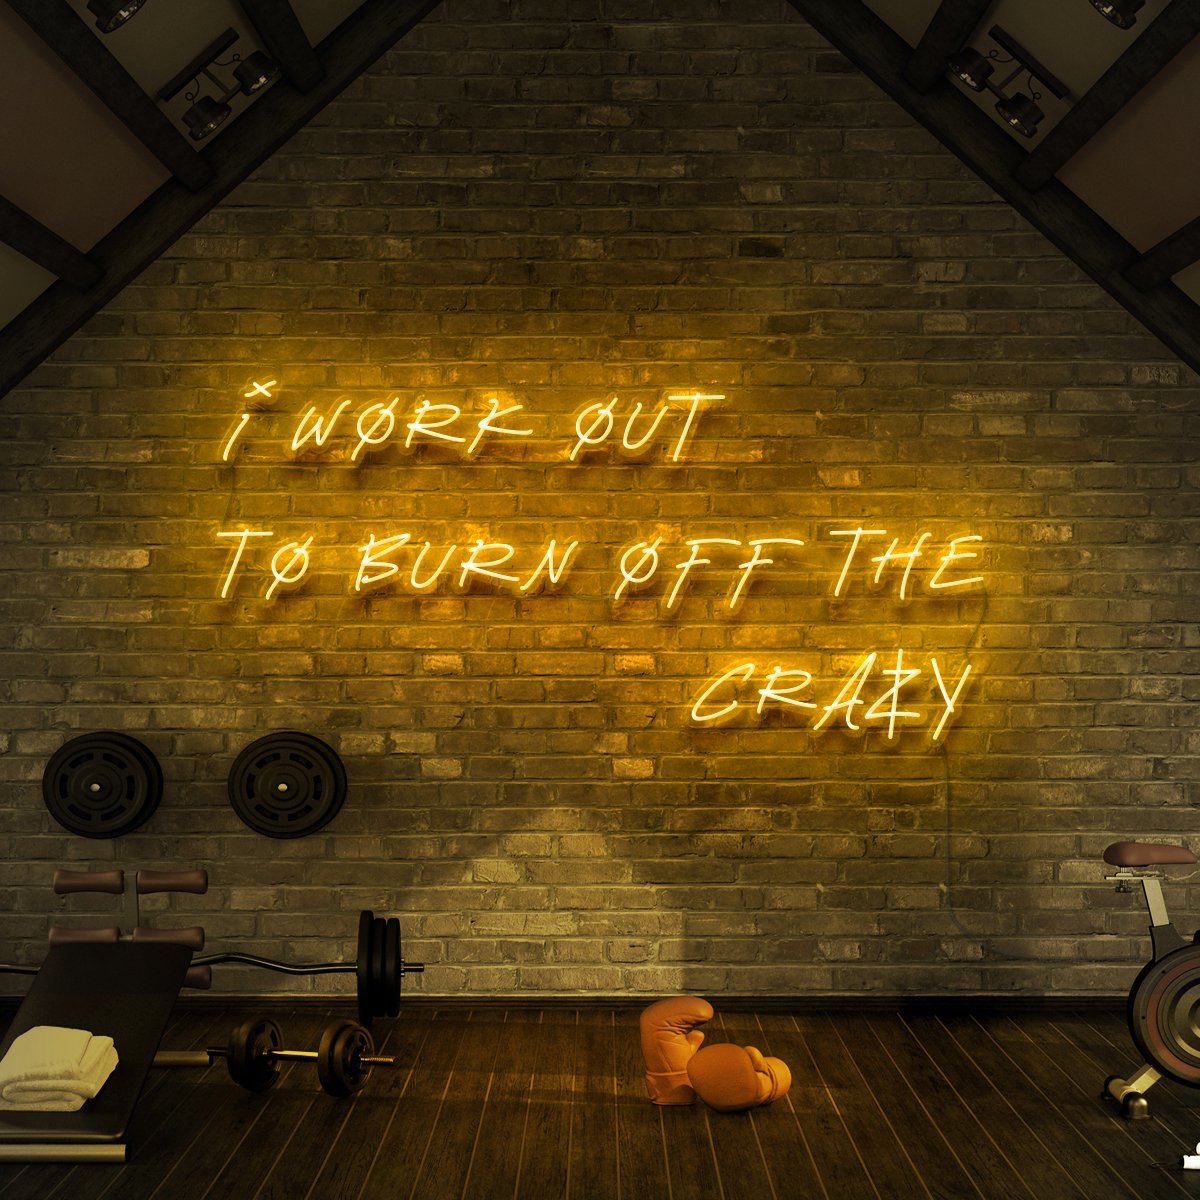 "I Work Out to Burn Off The Crazy" Neon Sign for Gyms & Fitness Studios